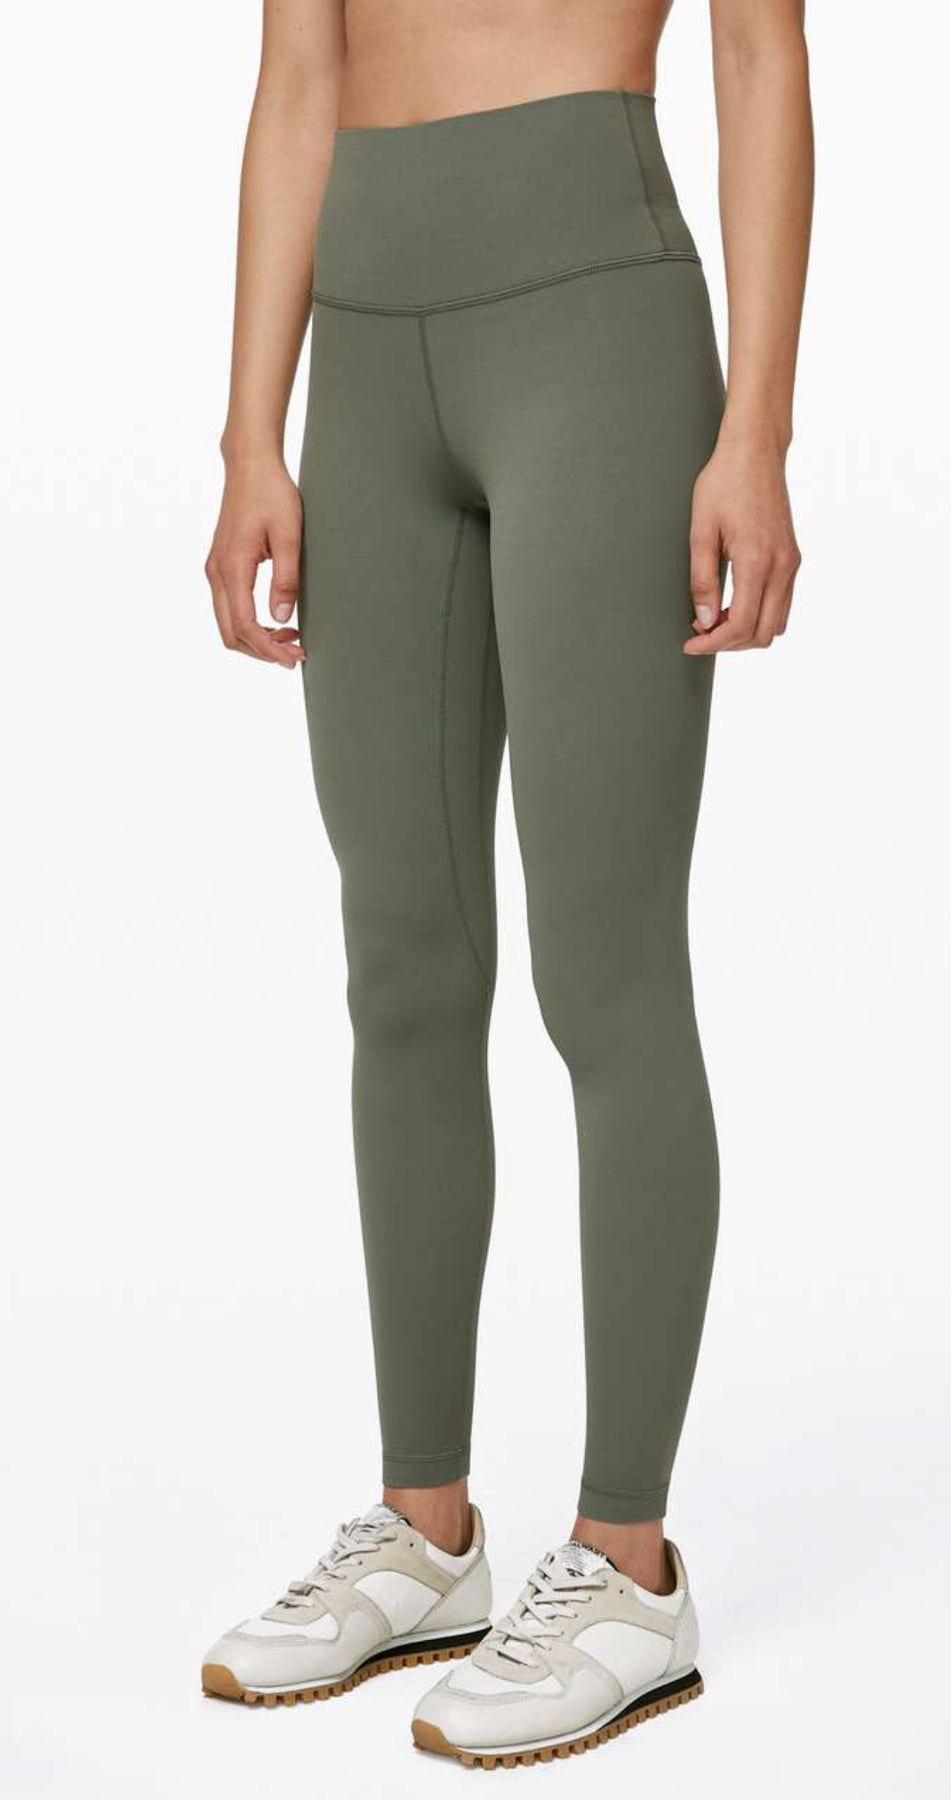 Buttersoft Leggings with Pockets – Basic Apparel Company